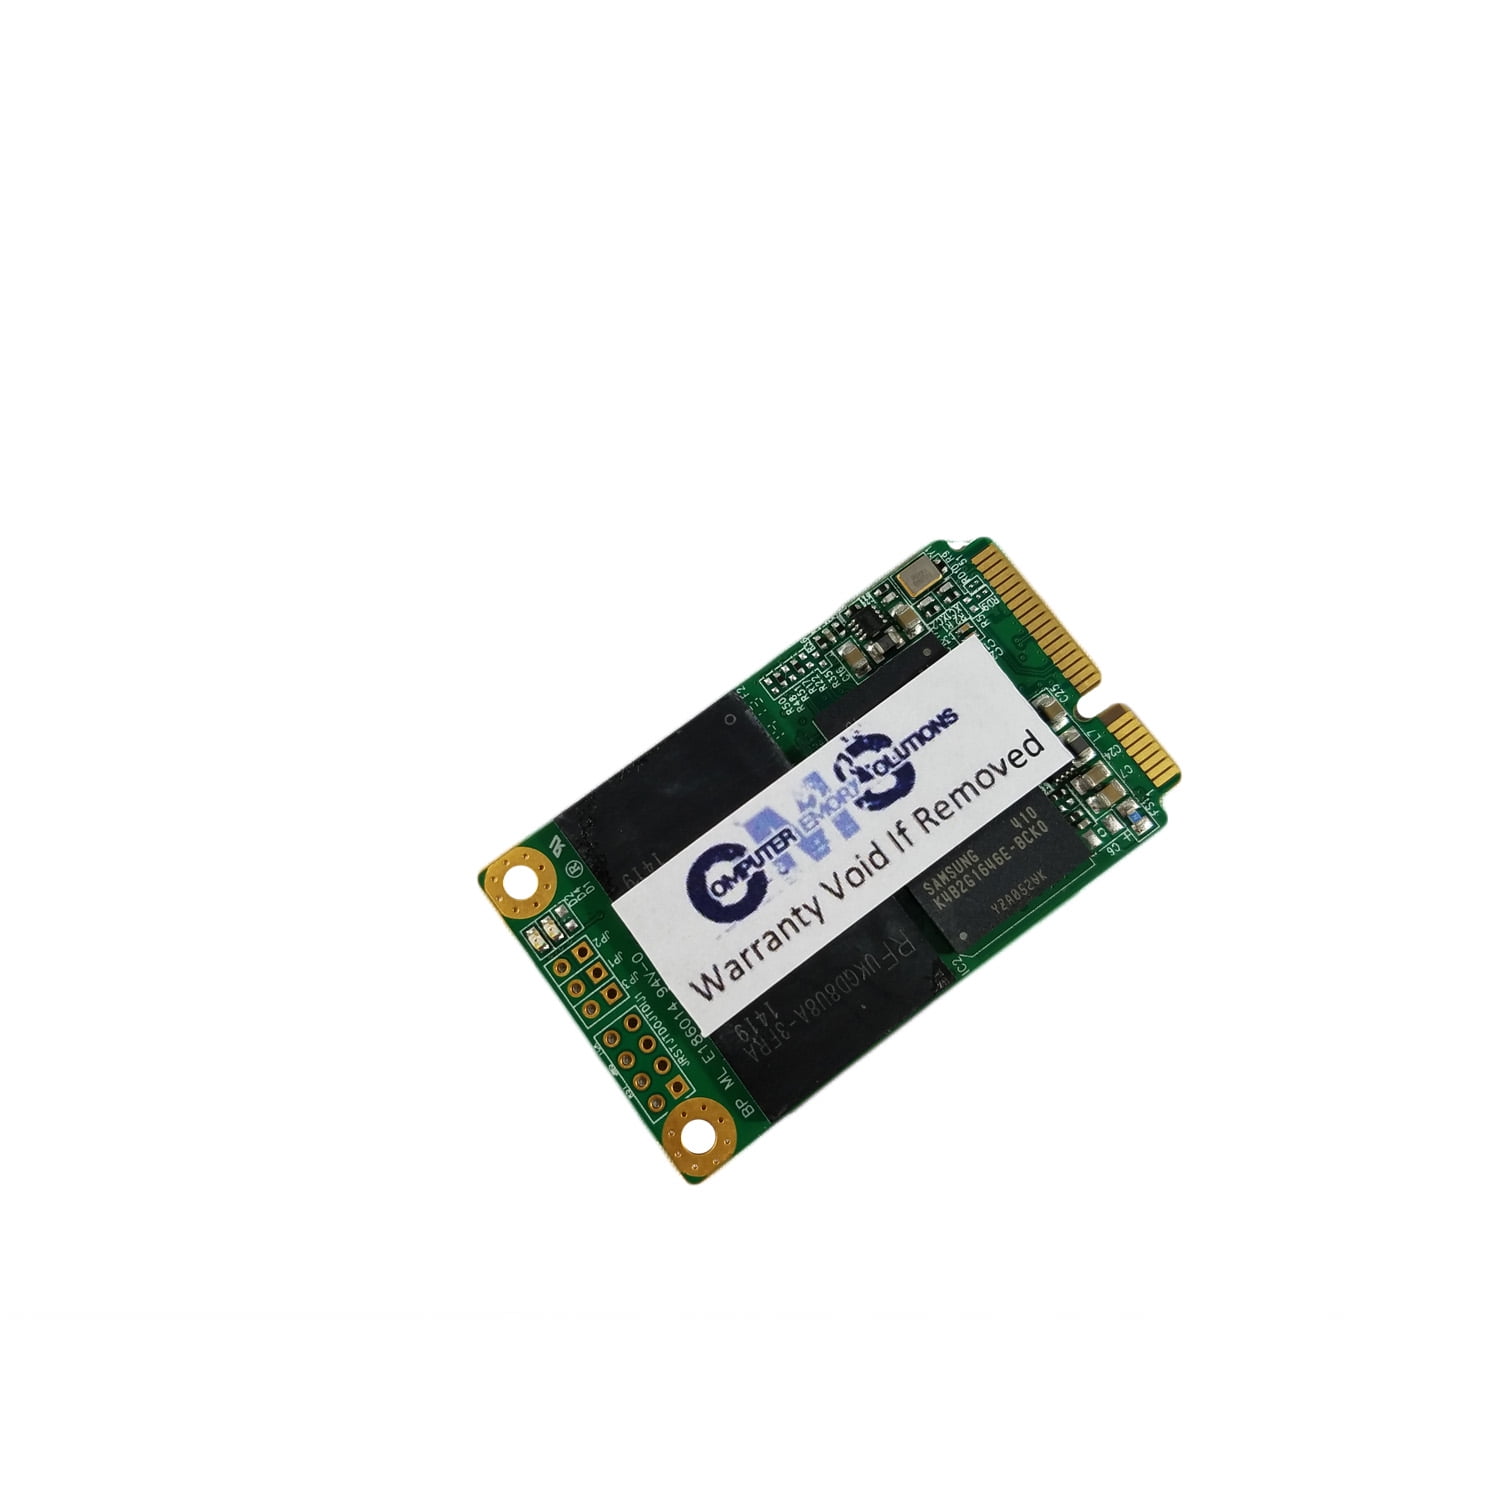 256GB SATA3 6Gb/s 2.5 Internal SSD Compatible with Acer Aspire One by CMS C91 D250-1165